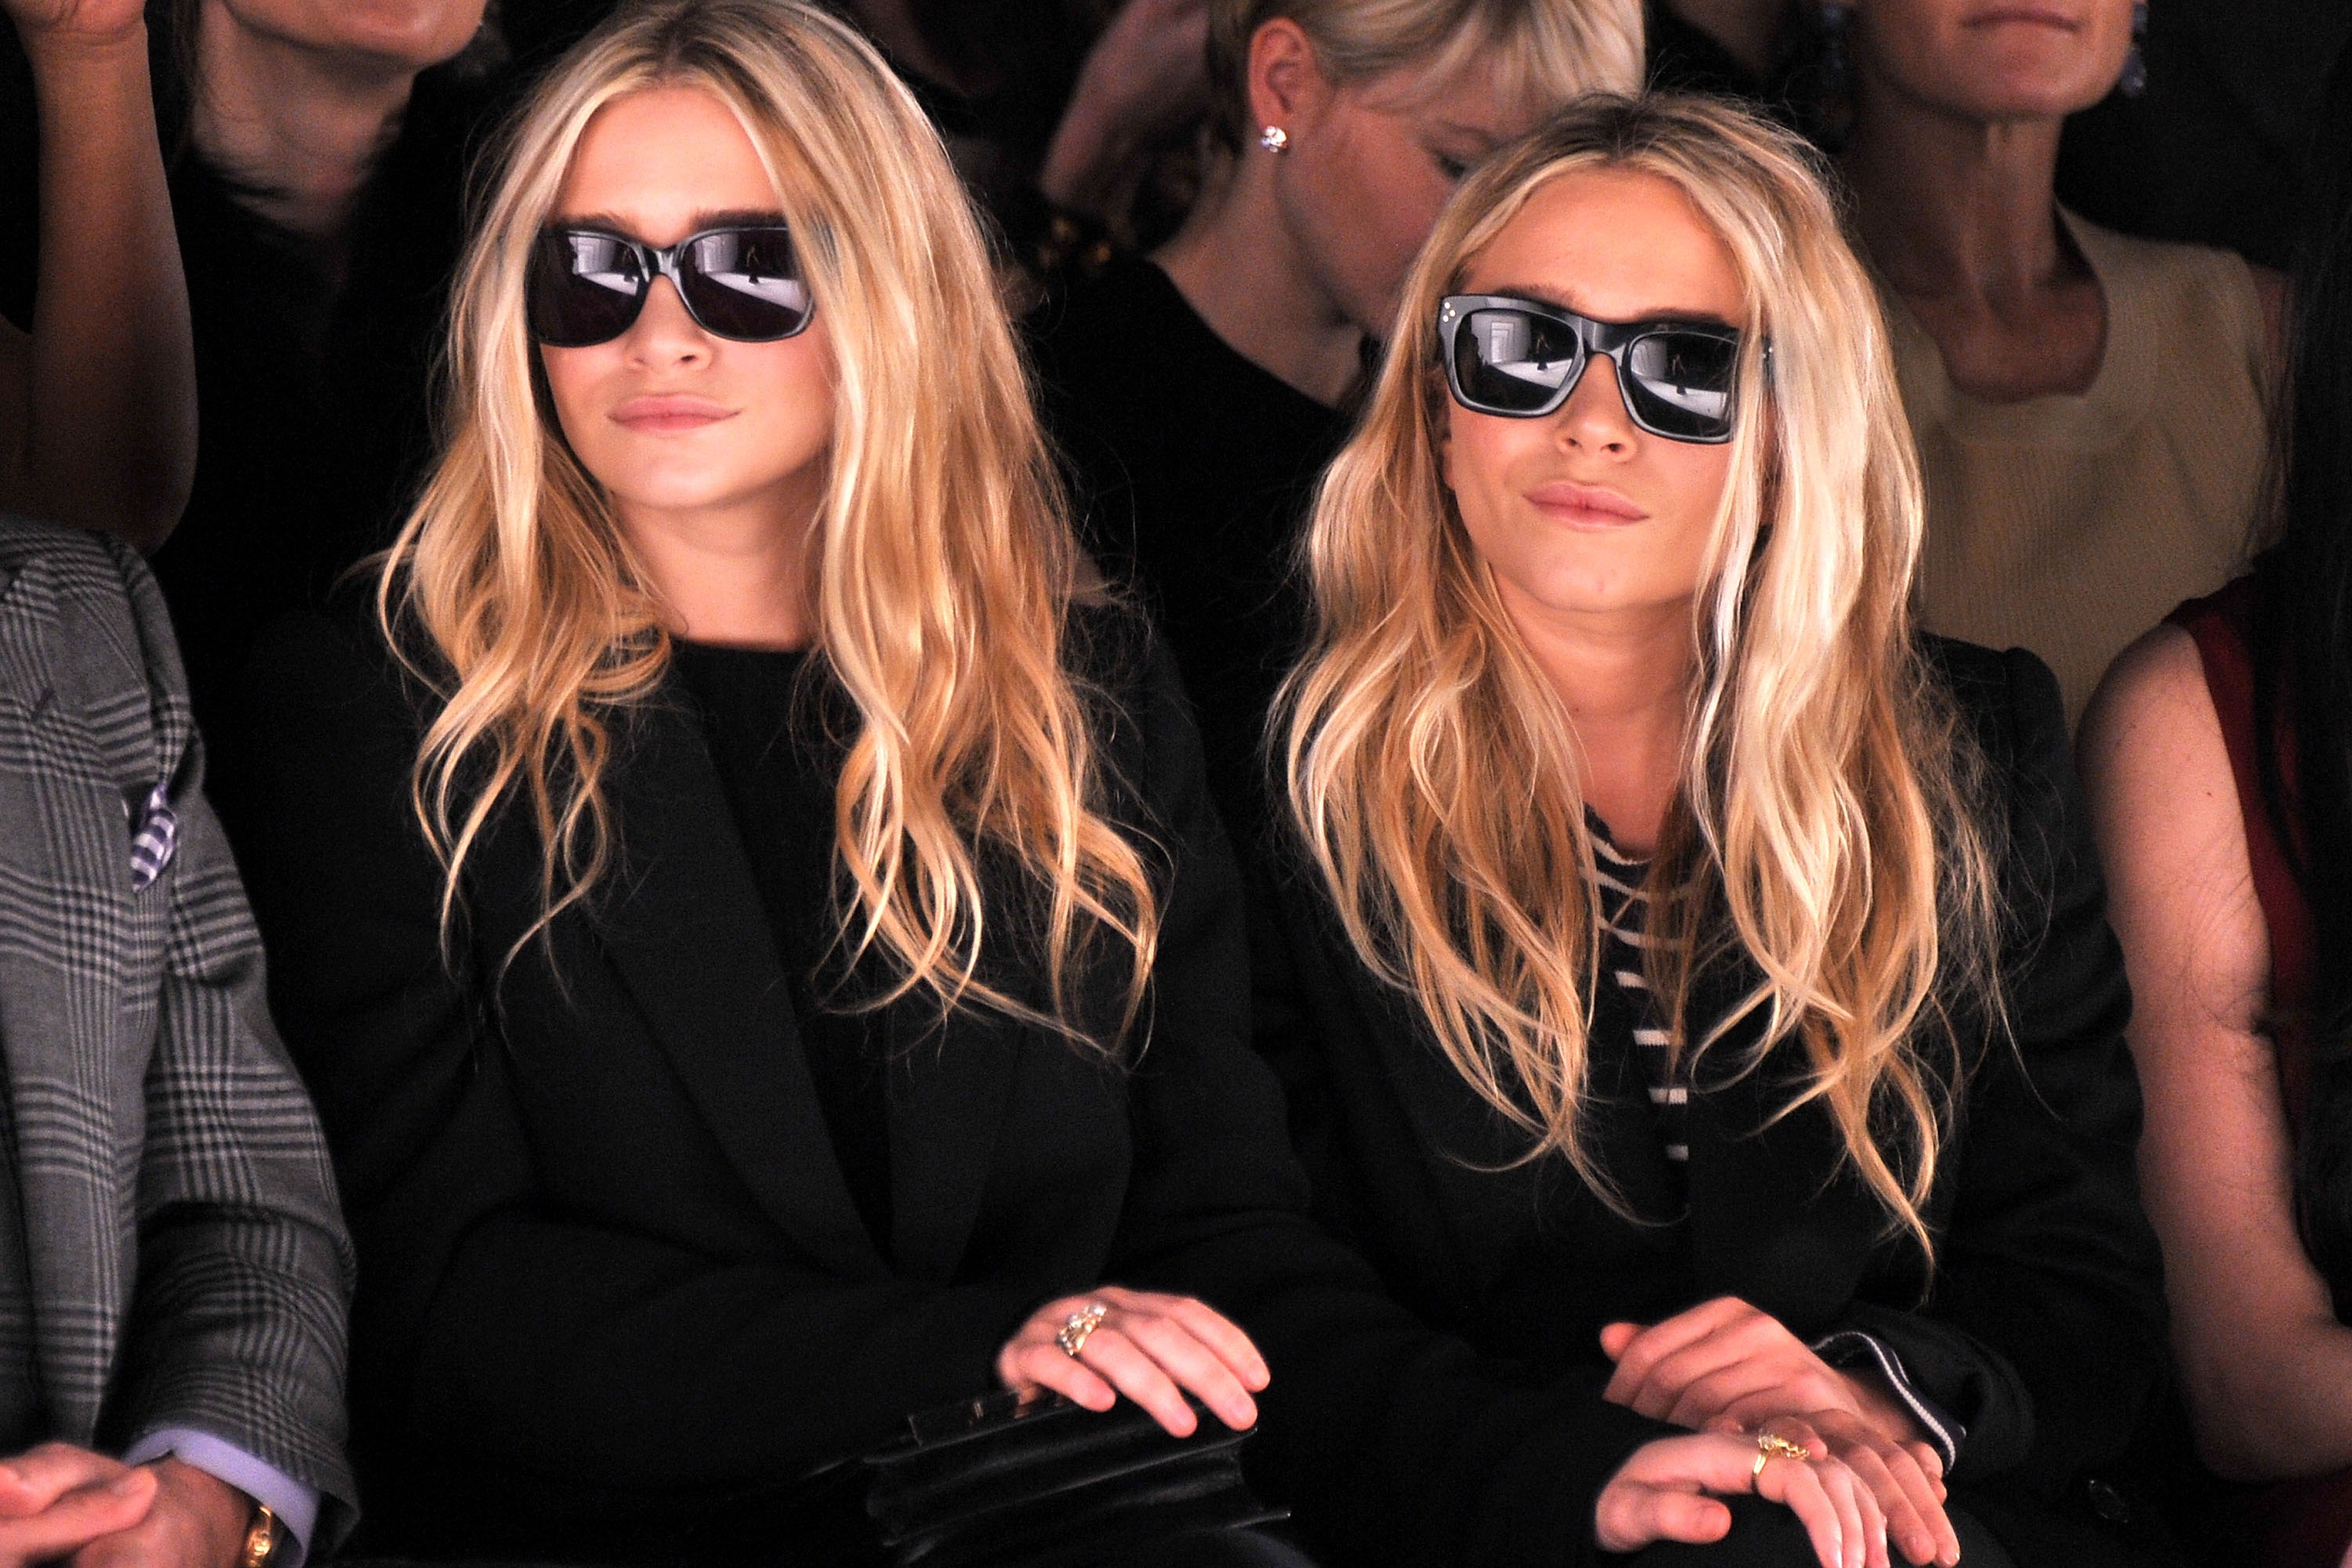 Ashley Olsen and Mary-Kate Olsen attend the J. Mendel Fall 2012 fashion show during Mercedes-Benz Fashion Week at The Theatre at Lincoln Center on February 15, 2012 in New York City.